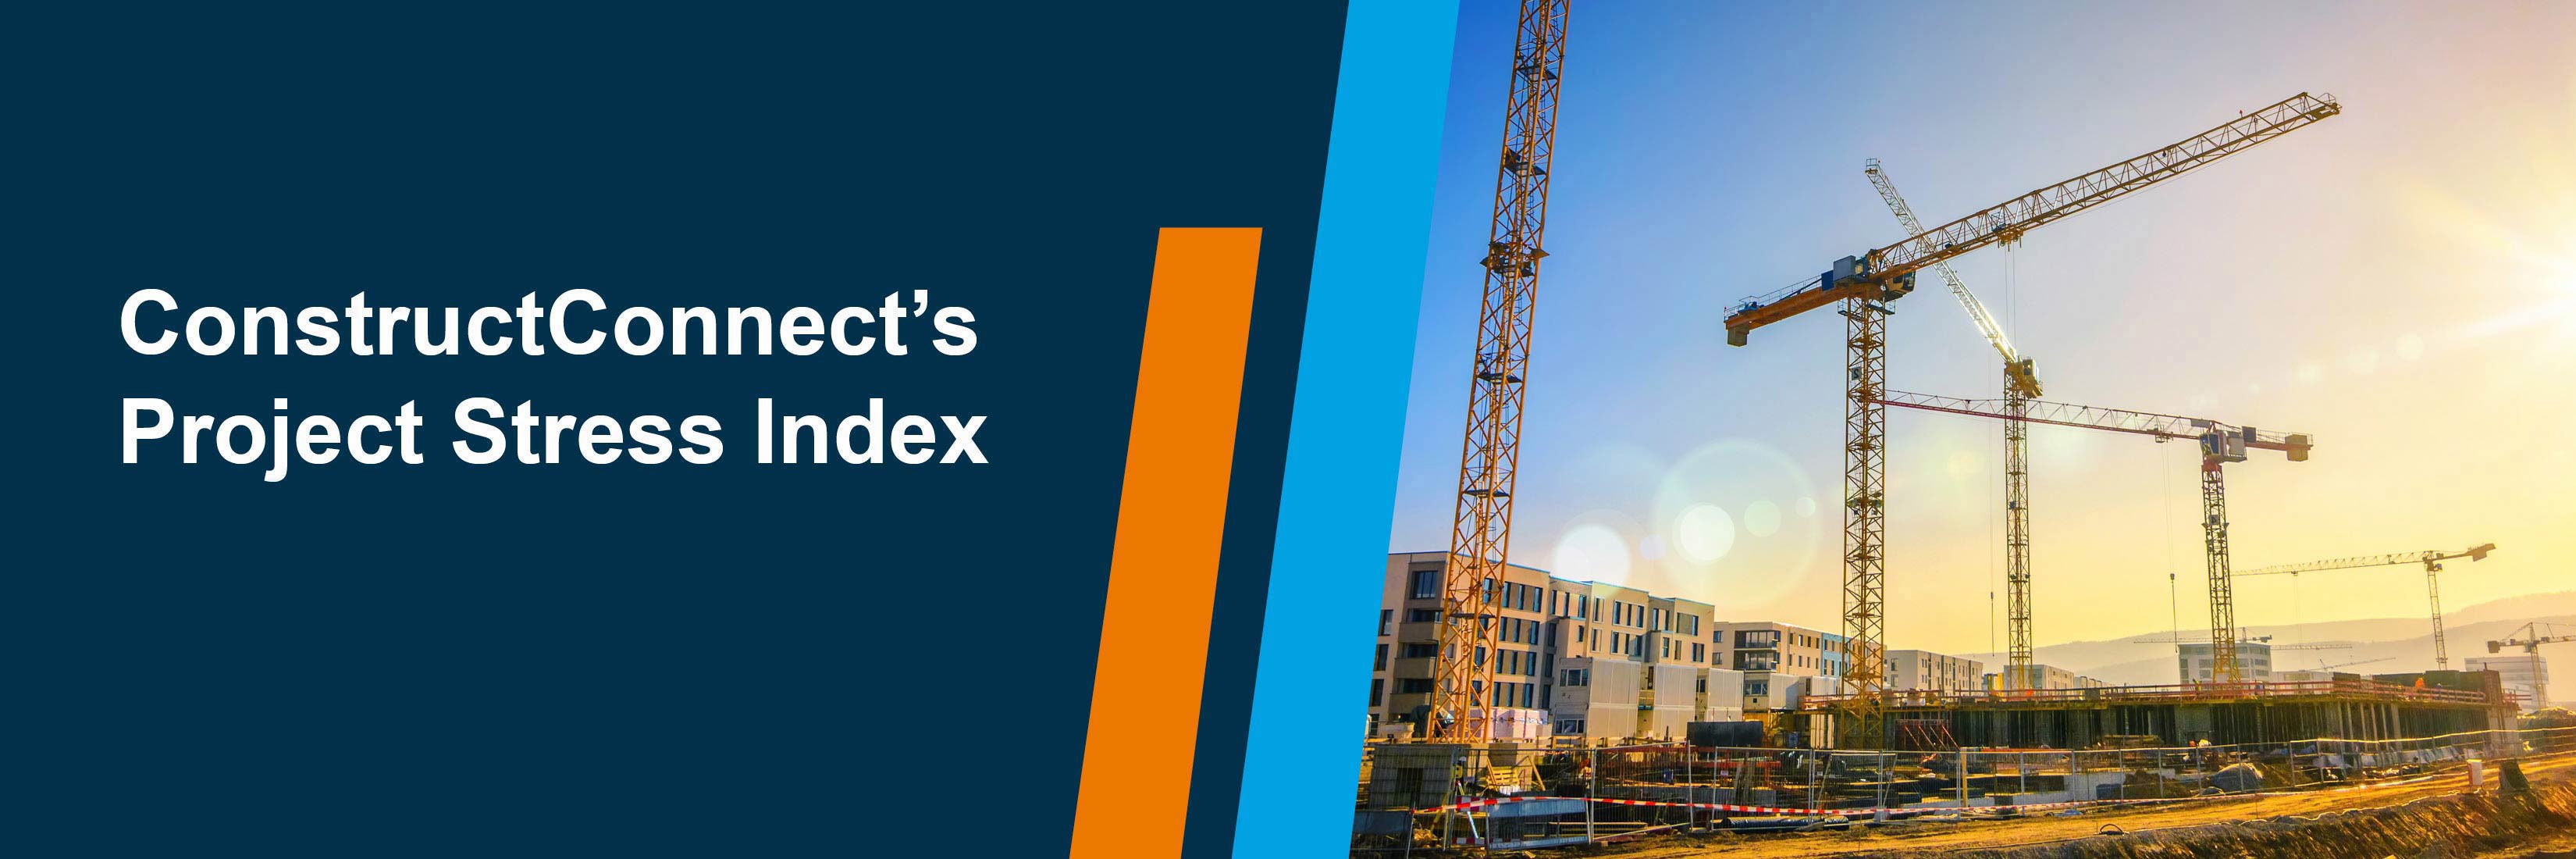 ConstructConnect's Project Stress Index - March 25